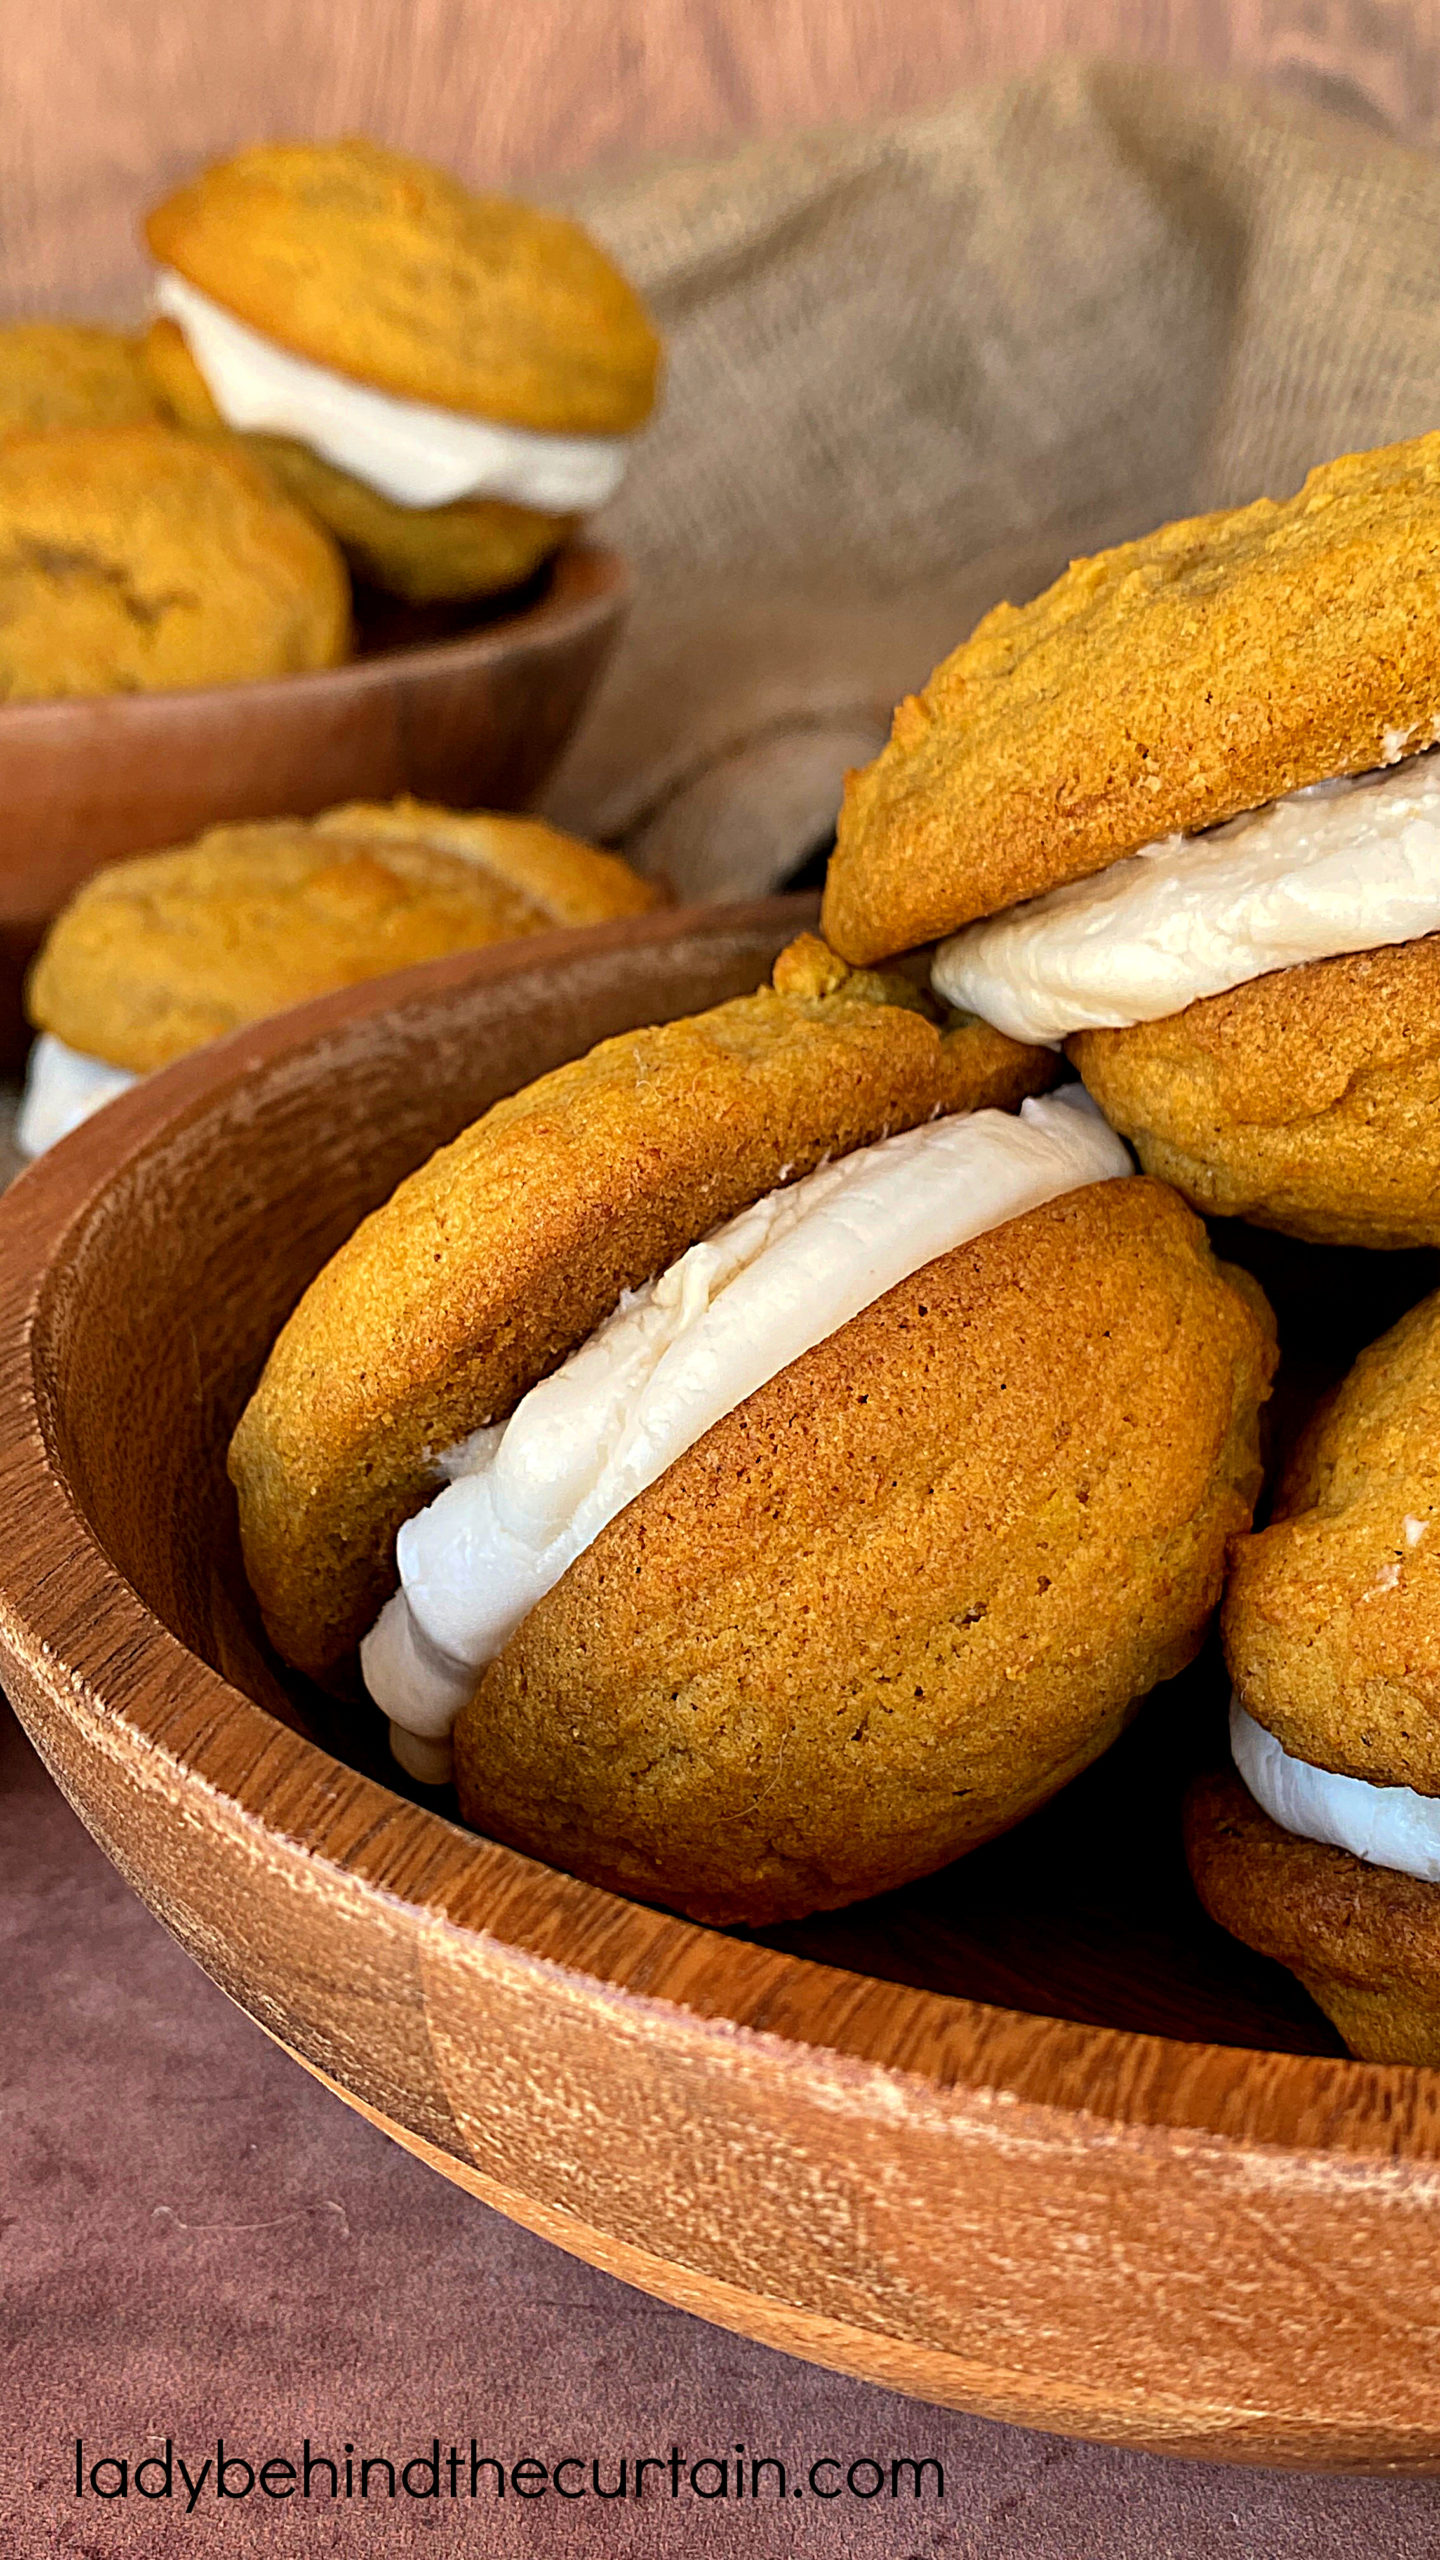 https://www.ladybehindthecurtain.com/wp-content/uploads/2022/11/Pumpkin-Spice-Whoopie-Pies-4-scaled.jpg